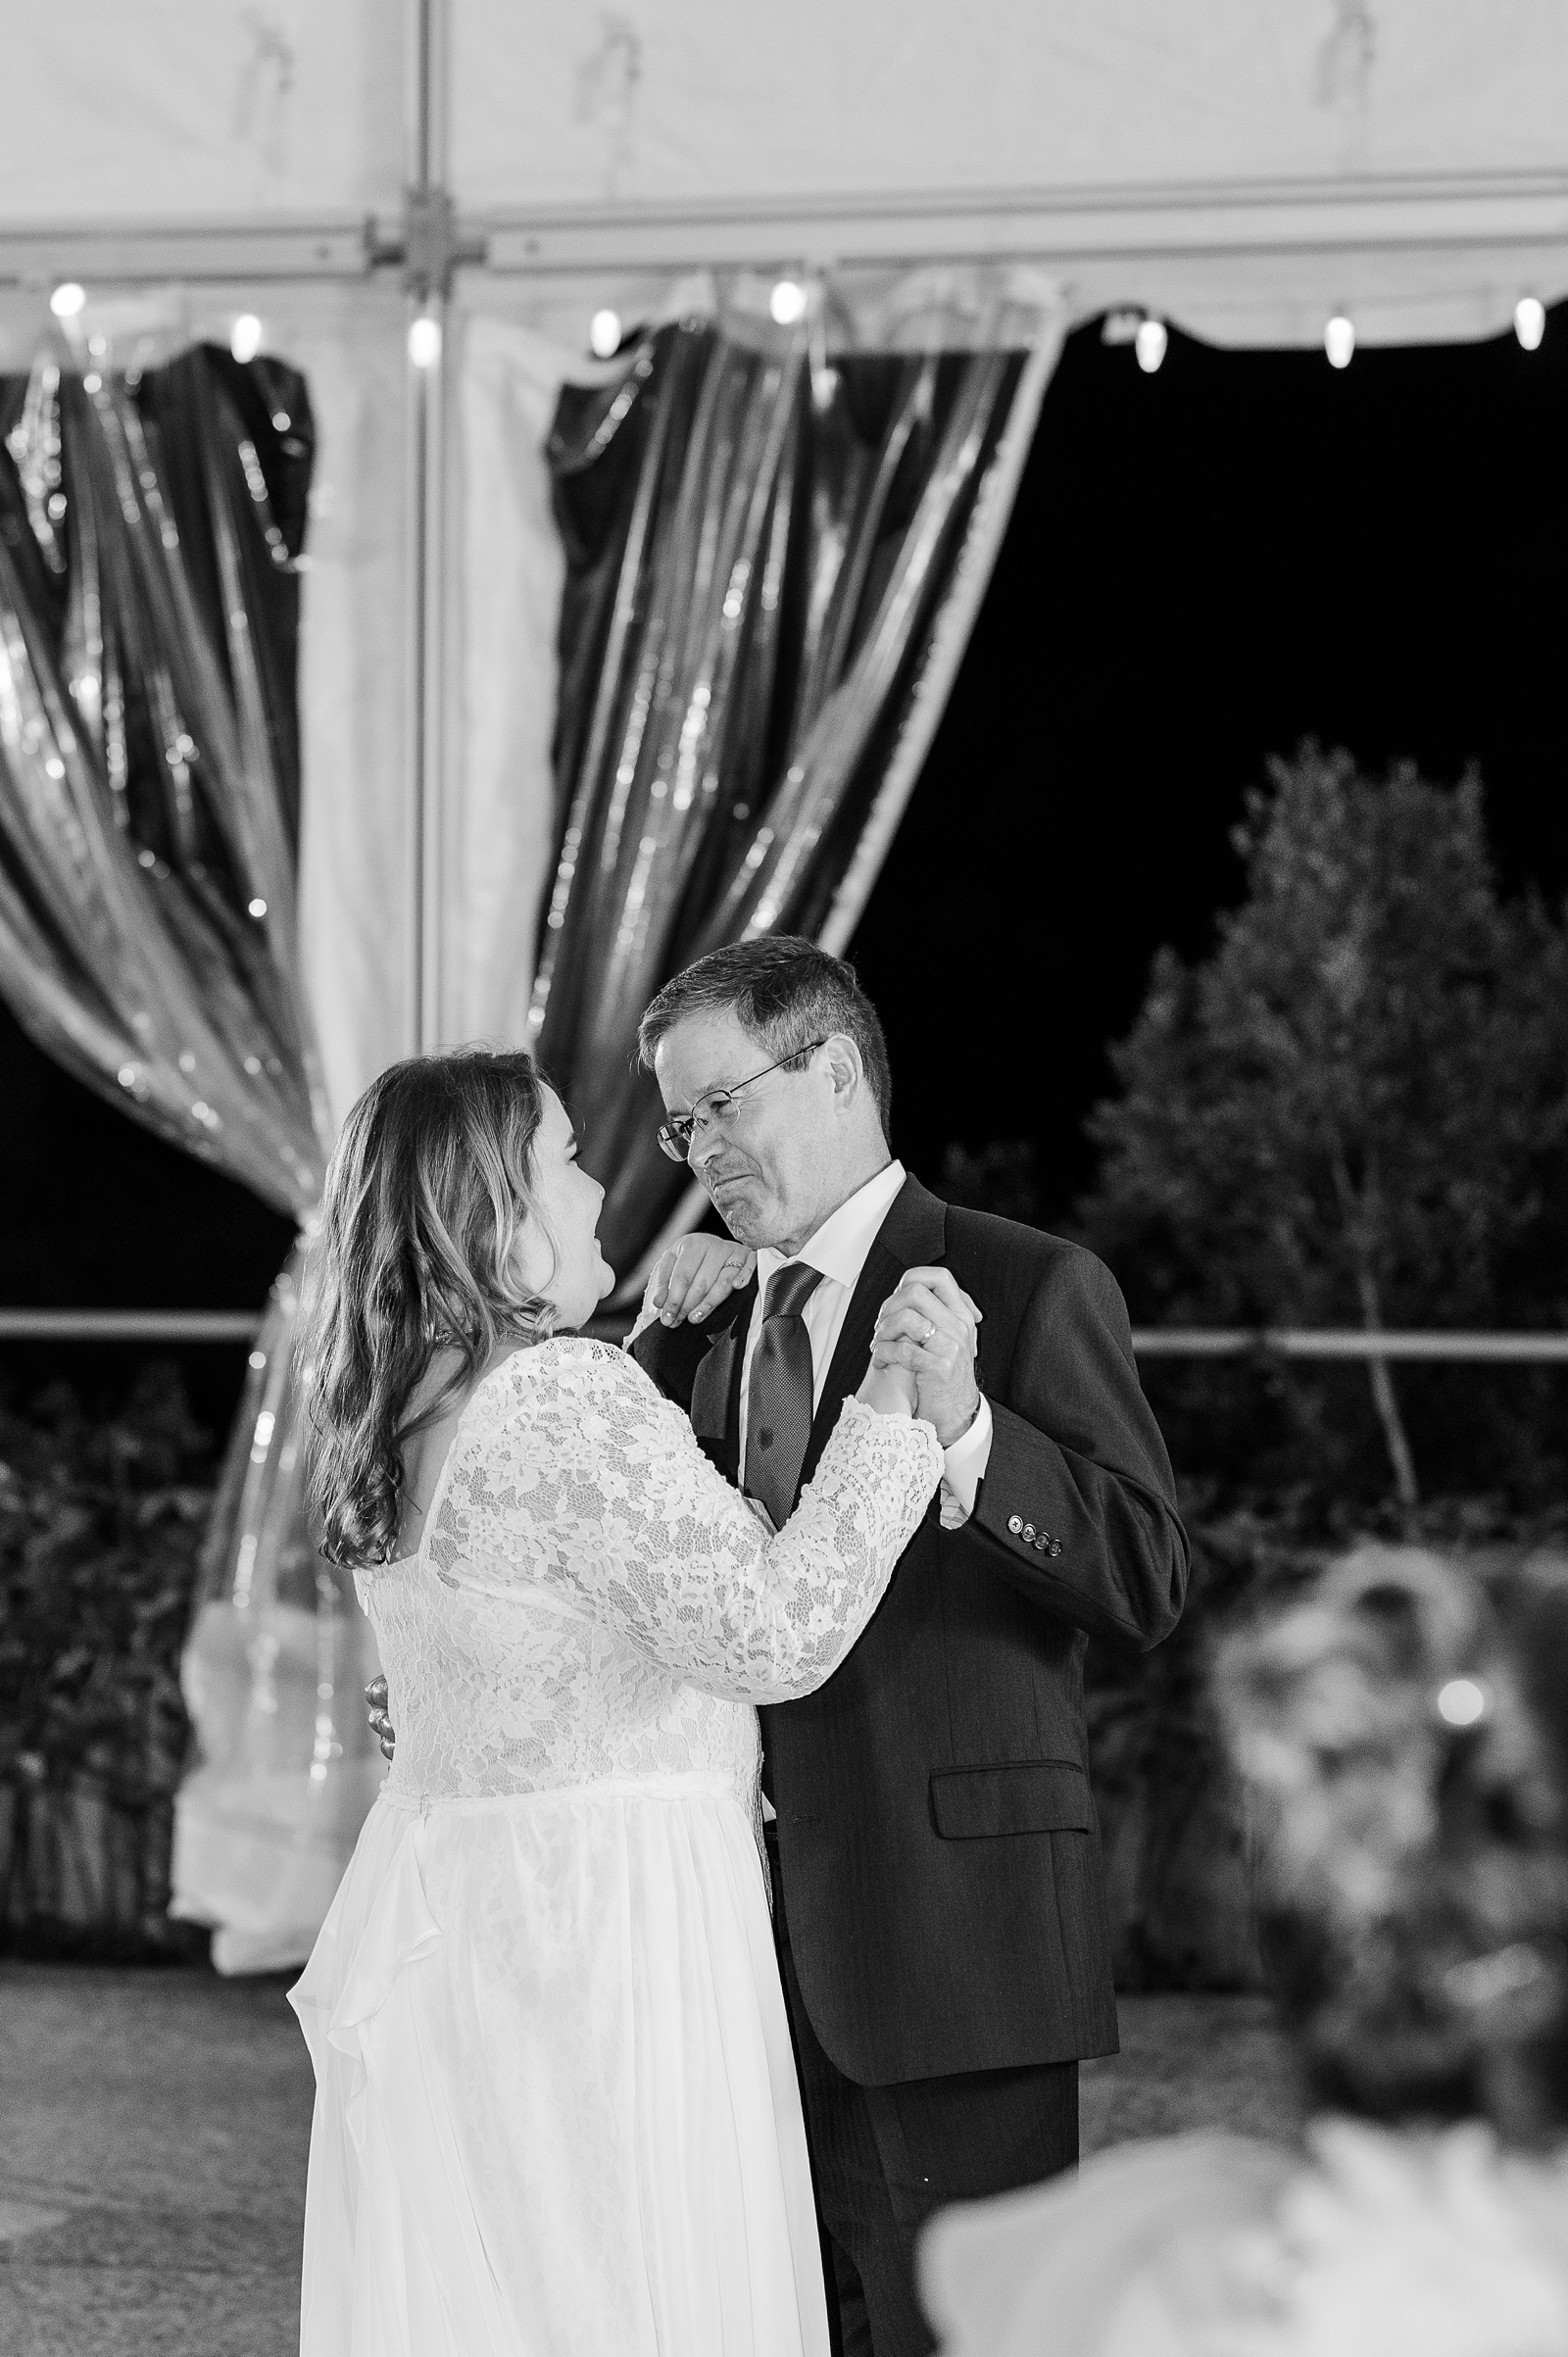 Father Daughter Dance at Maymont Wedding Reception. Photography by Richmond Wedding Photographer Kailey Brianne Photography.